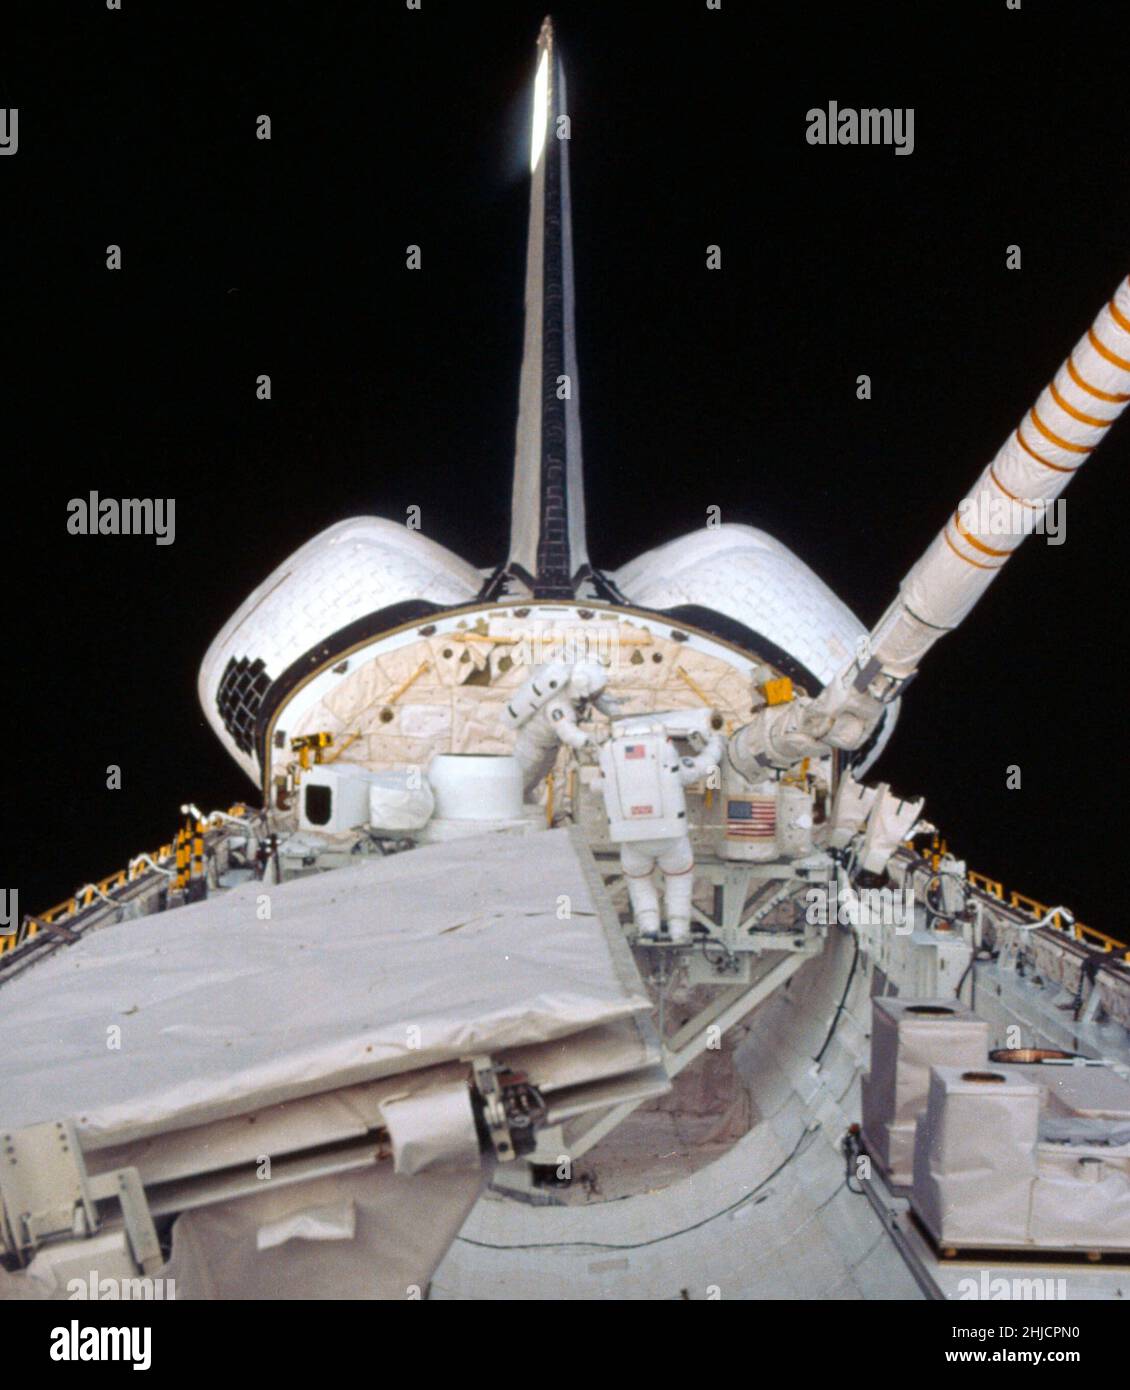 Astronauts Kathryn D. Sullivan, center left, and David C. Leestma, both 41-G mission specialists, perform an in-space simulation of refueling another spacecraft in orbit. Their station on the space shuttle Challenger is the orbital refueling system (ORS), positioned on the mission peculiar support structure (MPR ESS). The Large Format Camera (LFC) is left of the two mission specialists. In the left foreground is the antenna for the shuttle imaging radar (SIR-B) system onboard. Stock Photo